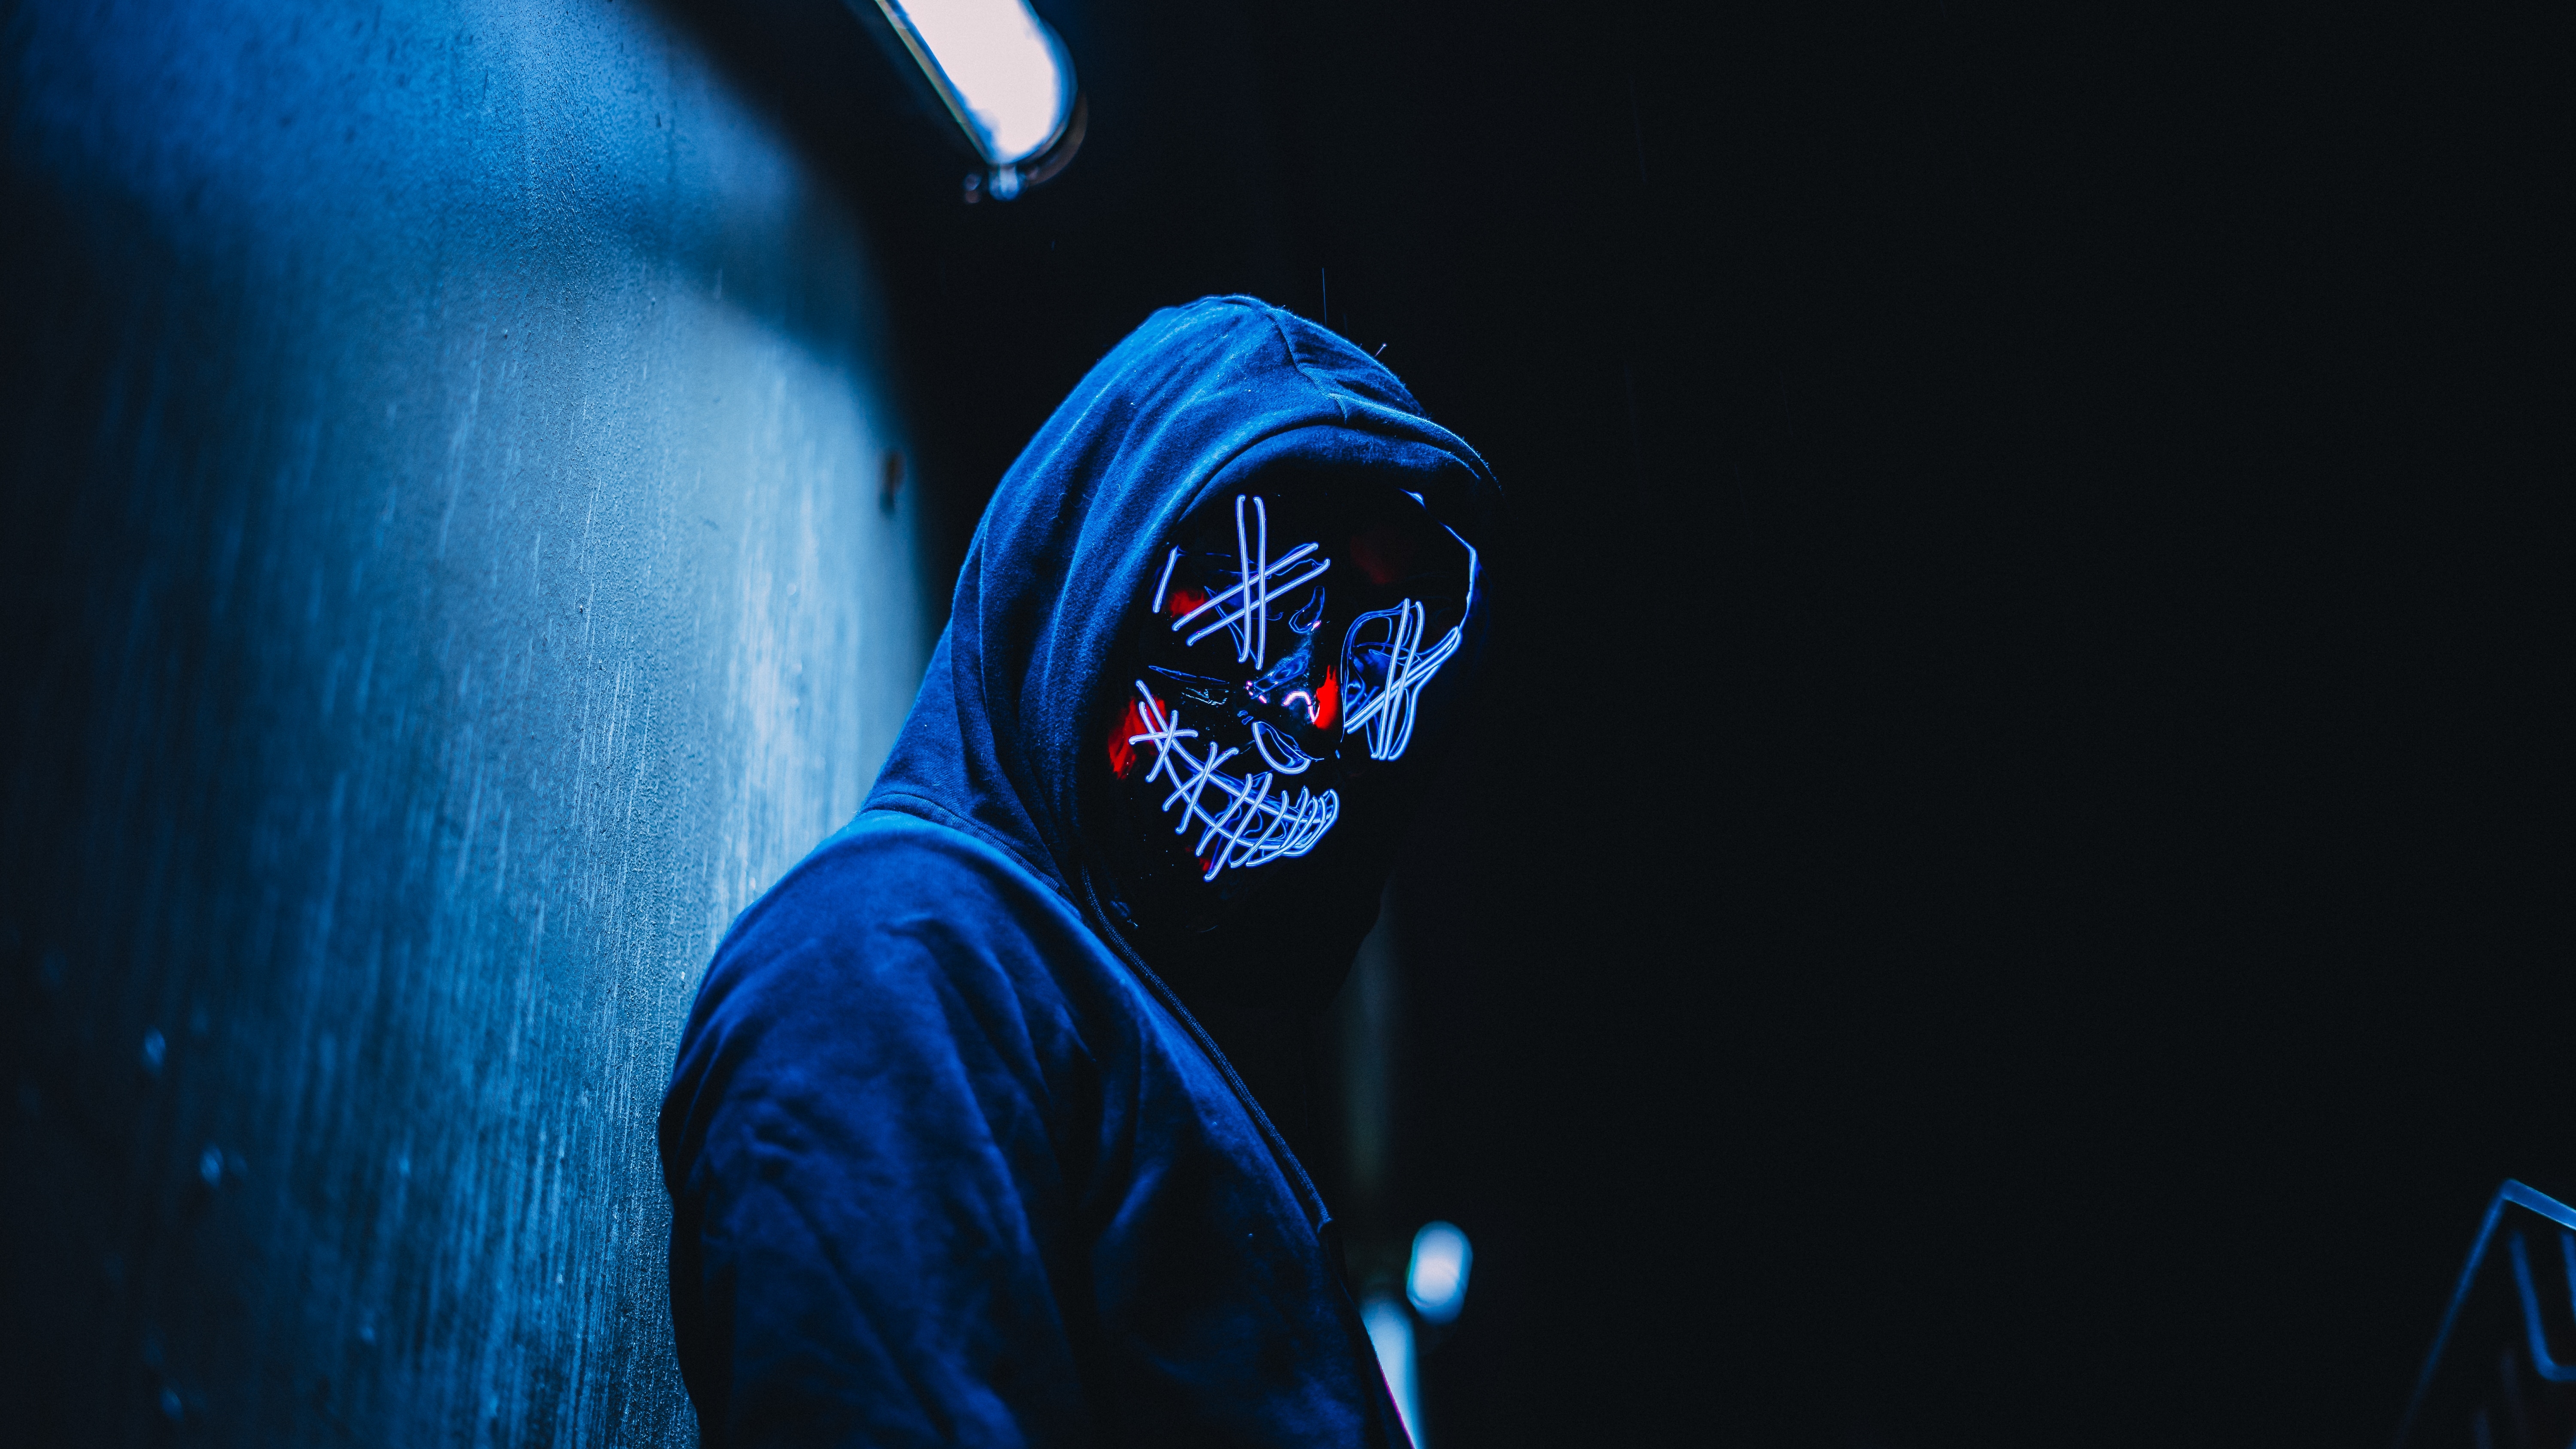 Wallpapers anonymou mask hoodie on the desktop